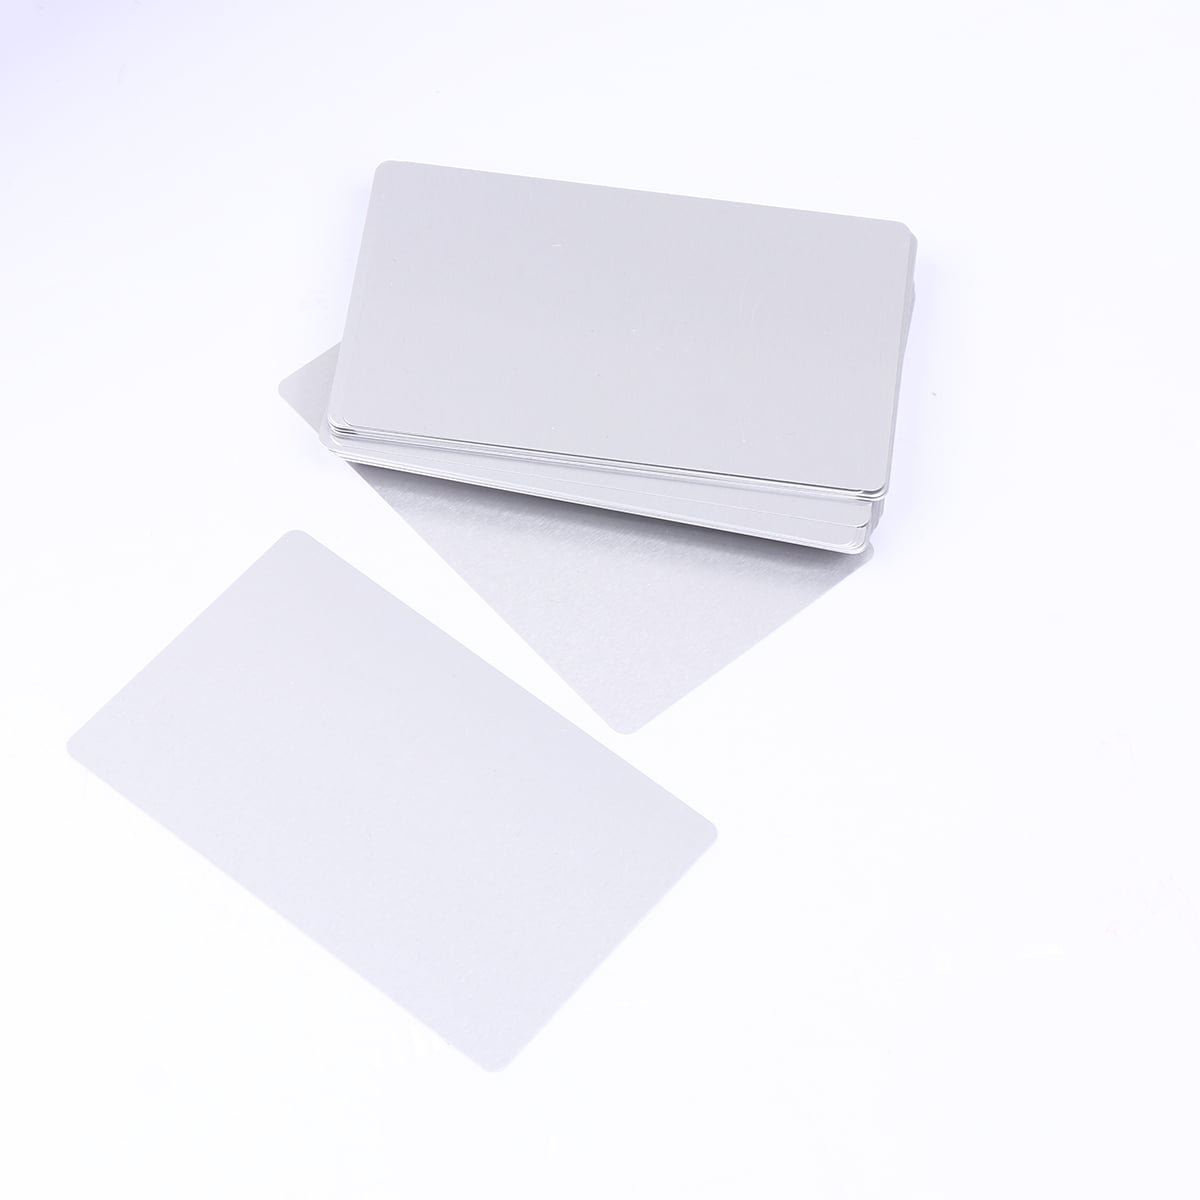 50 Pcs 0.2mm Thin Colored Anodized Aluminum Business Blank Machine Engraver and CNC Engraving Available (Silver), Size: 9